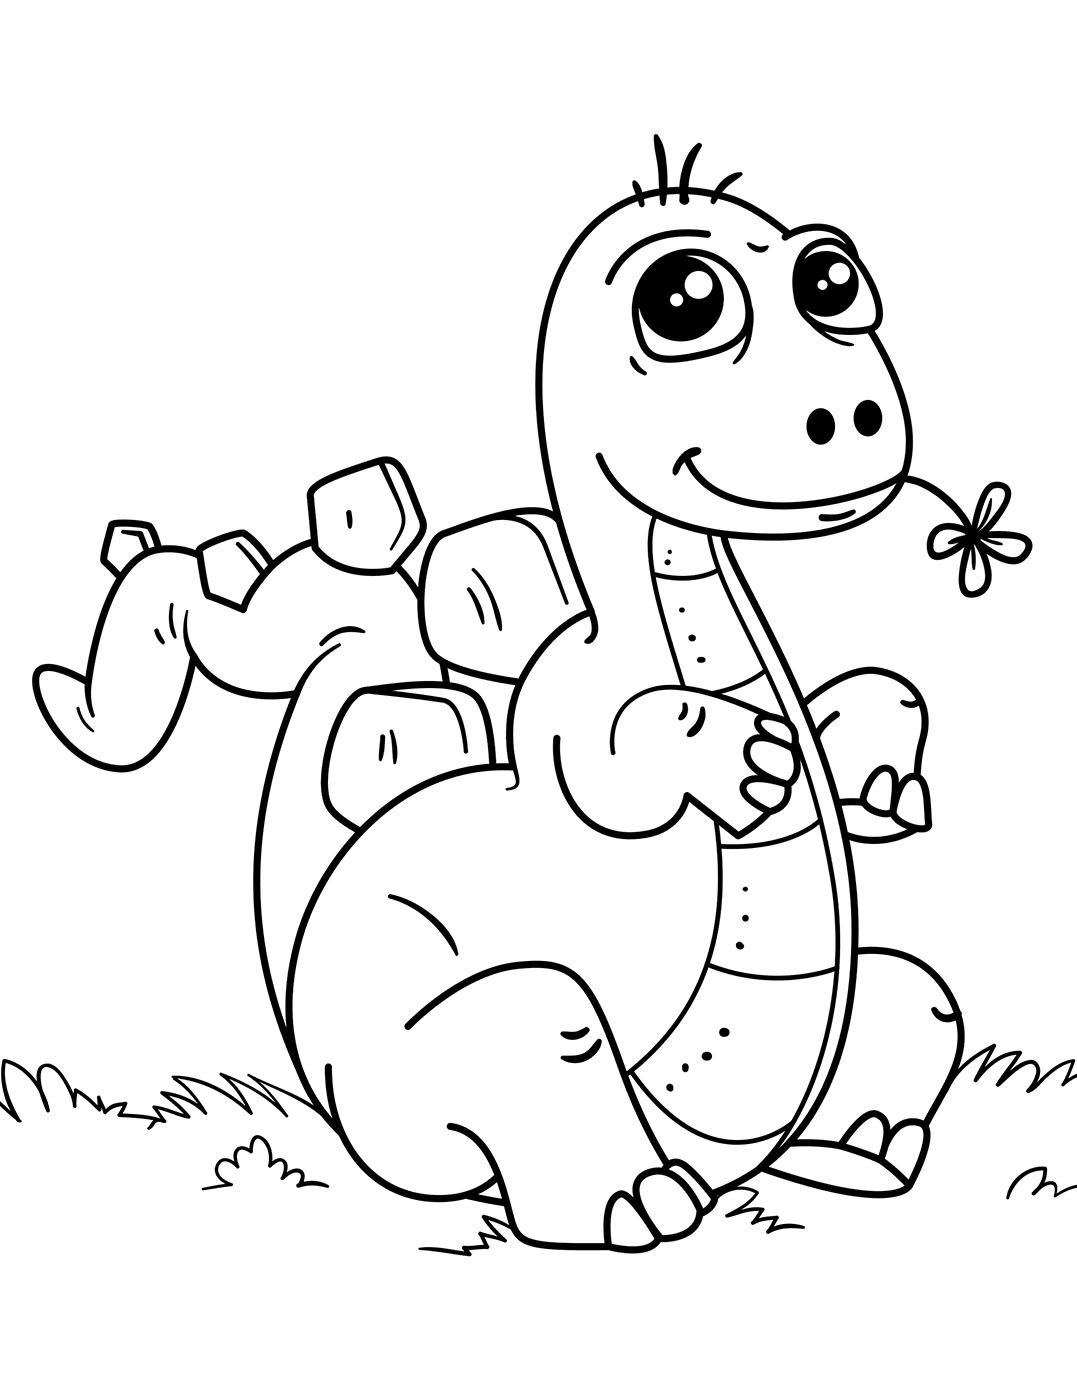  Dinosaurs  to color  for kids  Ba Dinosaurs  Kids  Coloring  